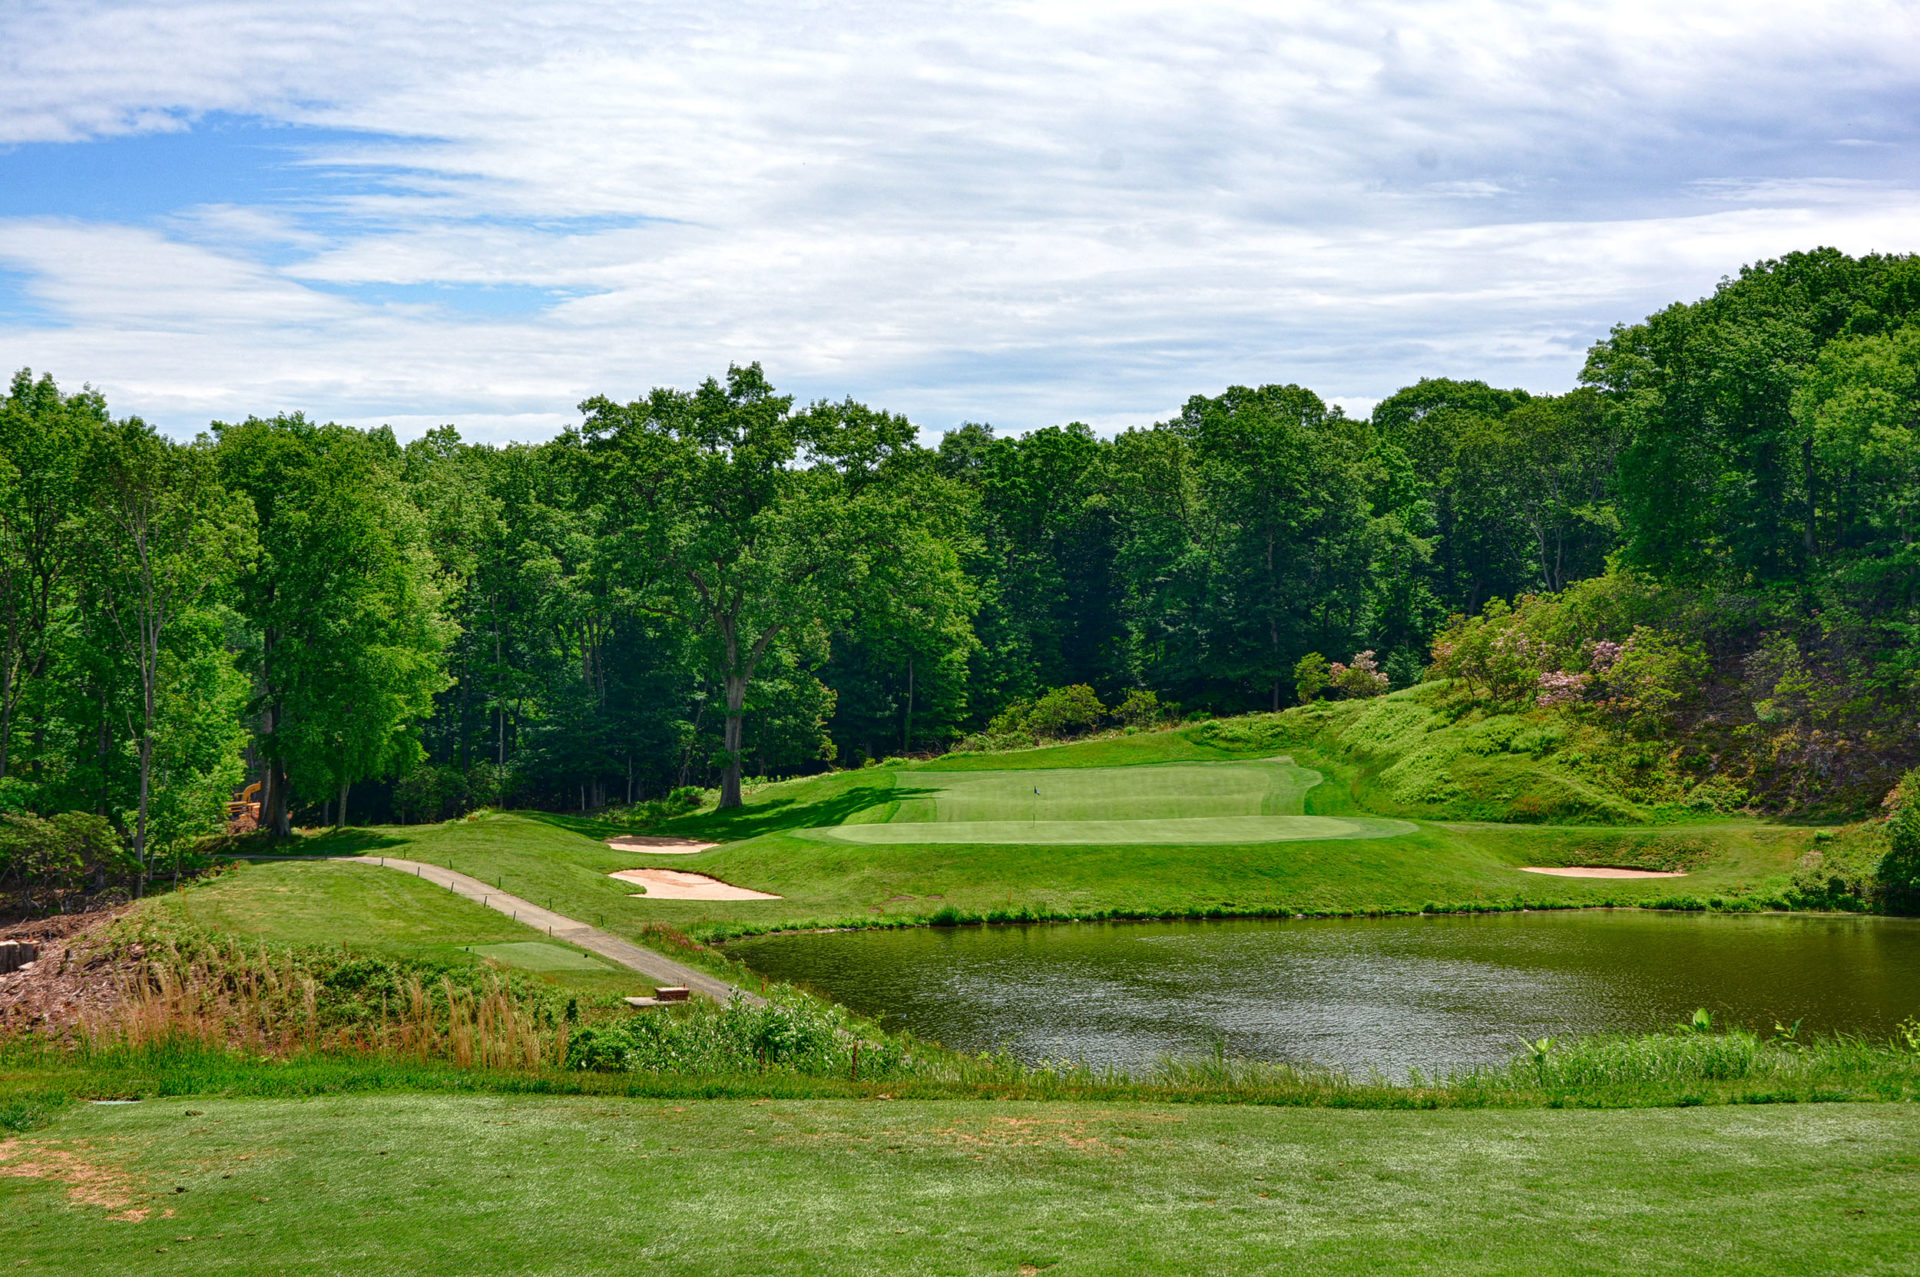 Best Golf Courses in Connecticut: A Small State with Great Golf